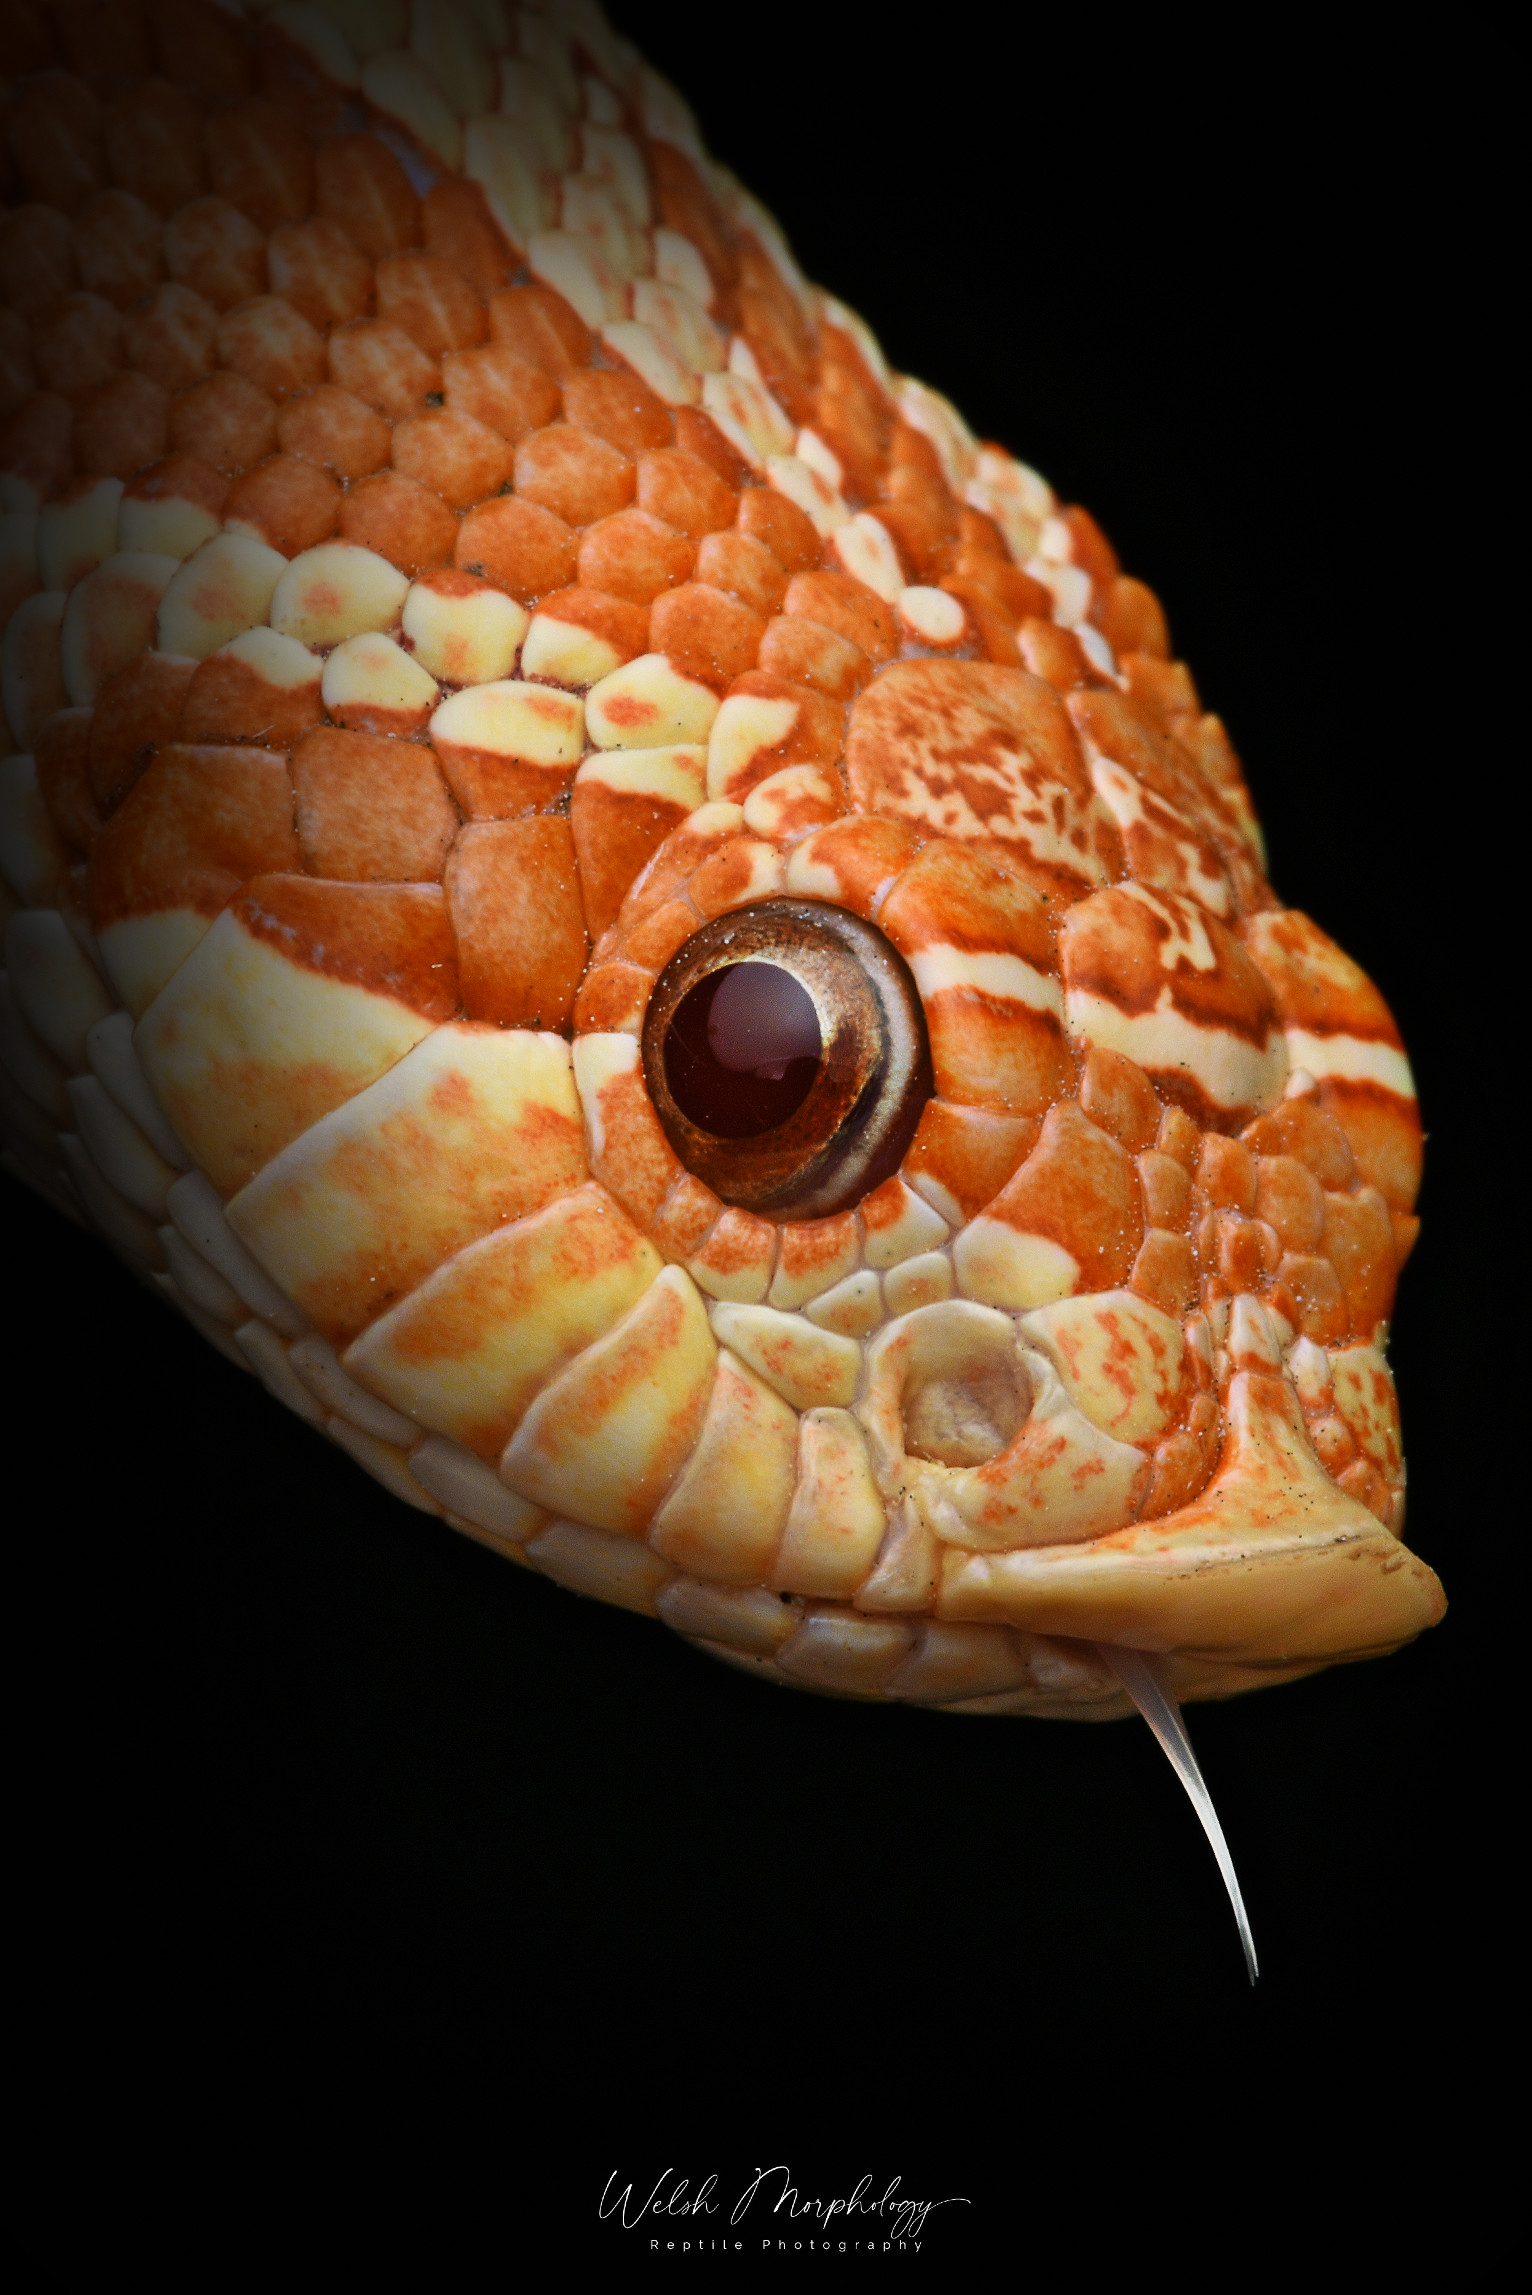 Red Albino by Welsh Morphology